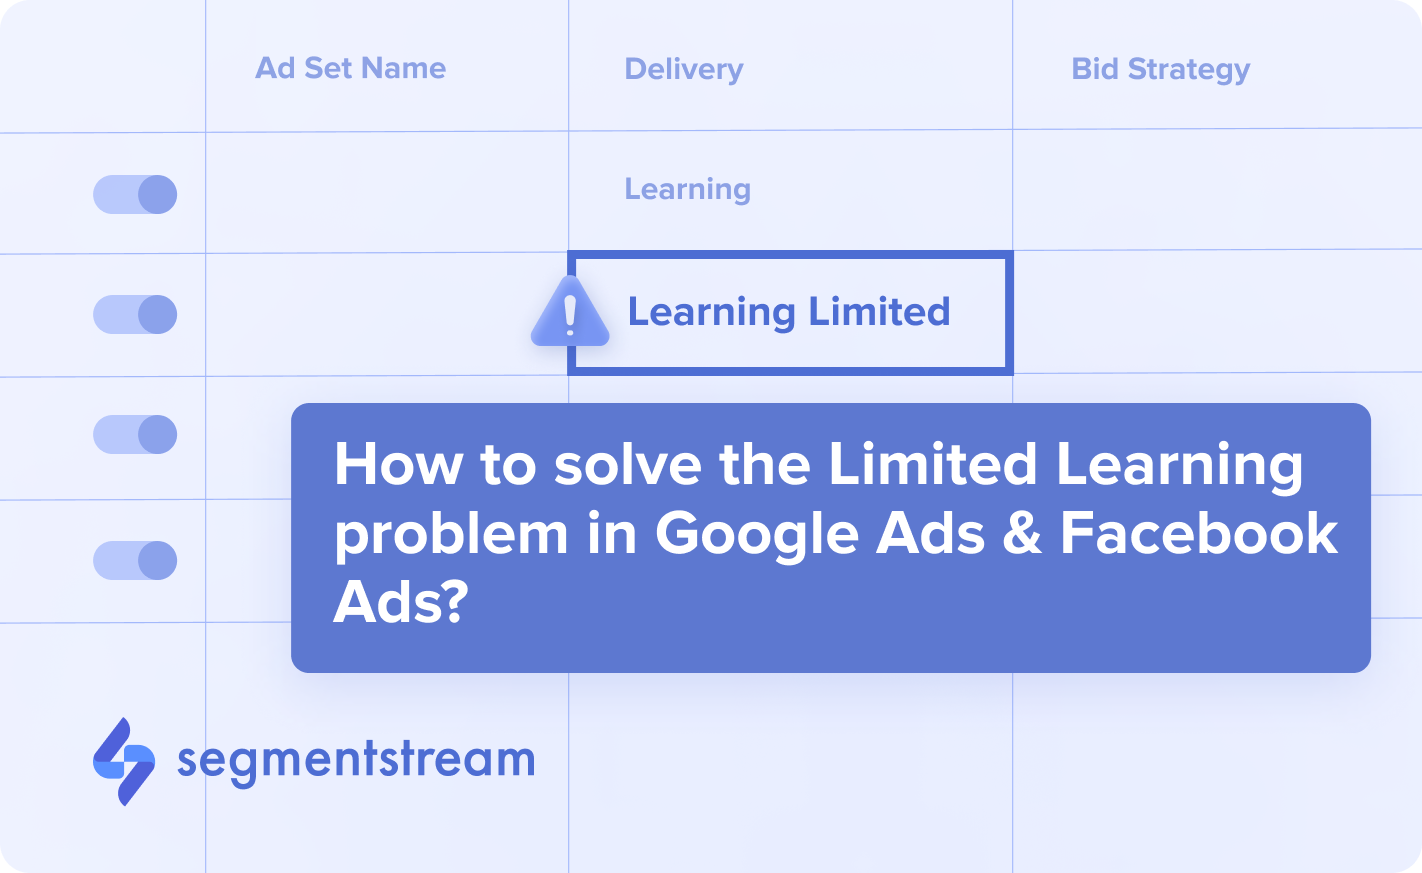 How to finally solve the Limited Learning problem in Facebook Ads and Google Ads?